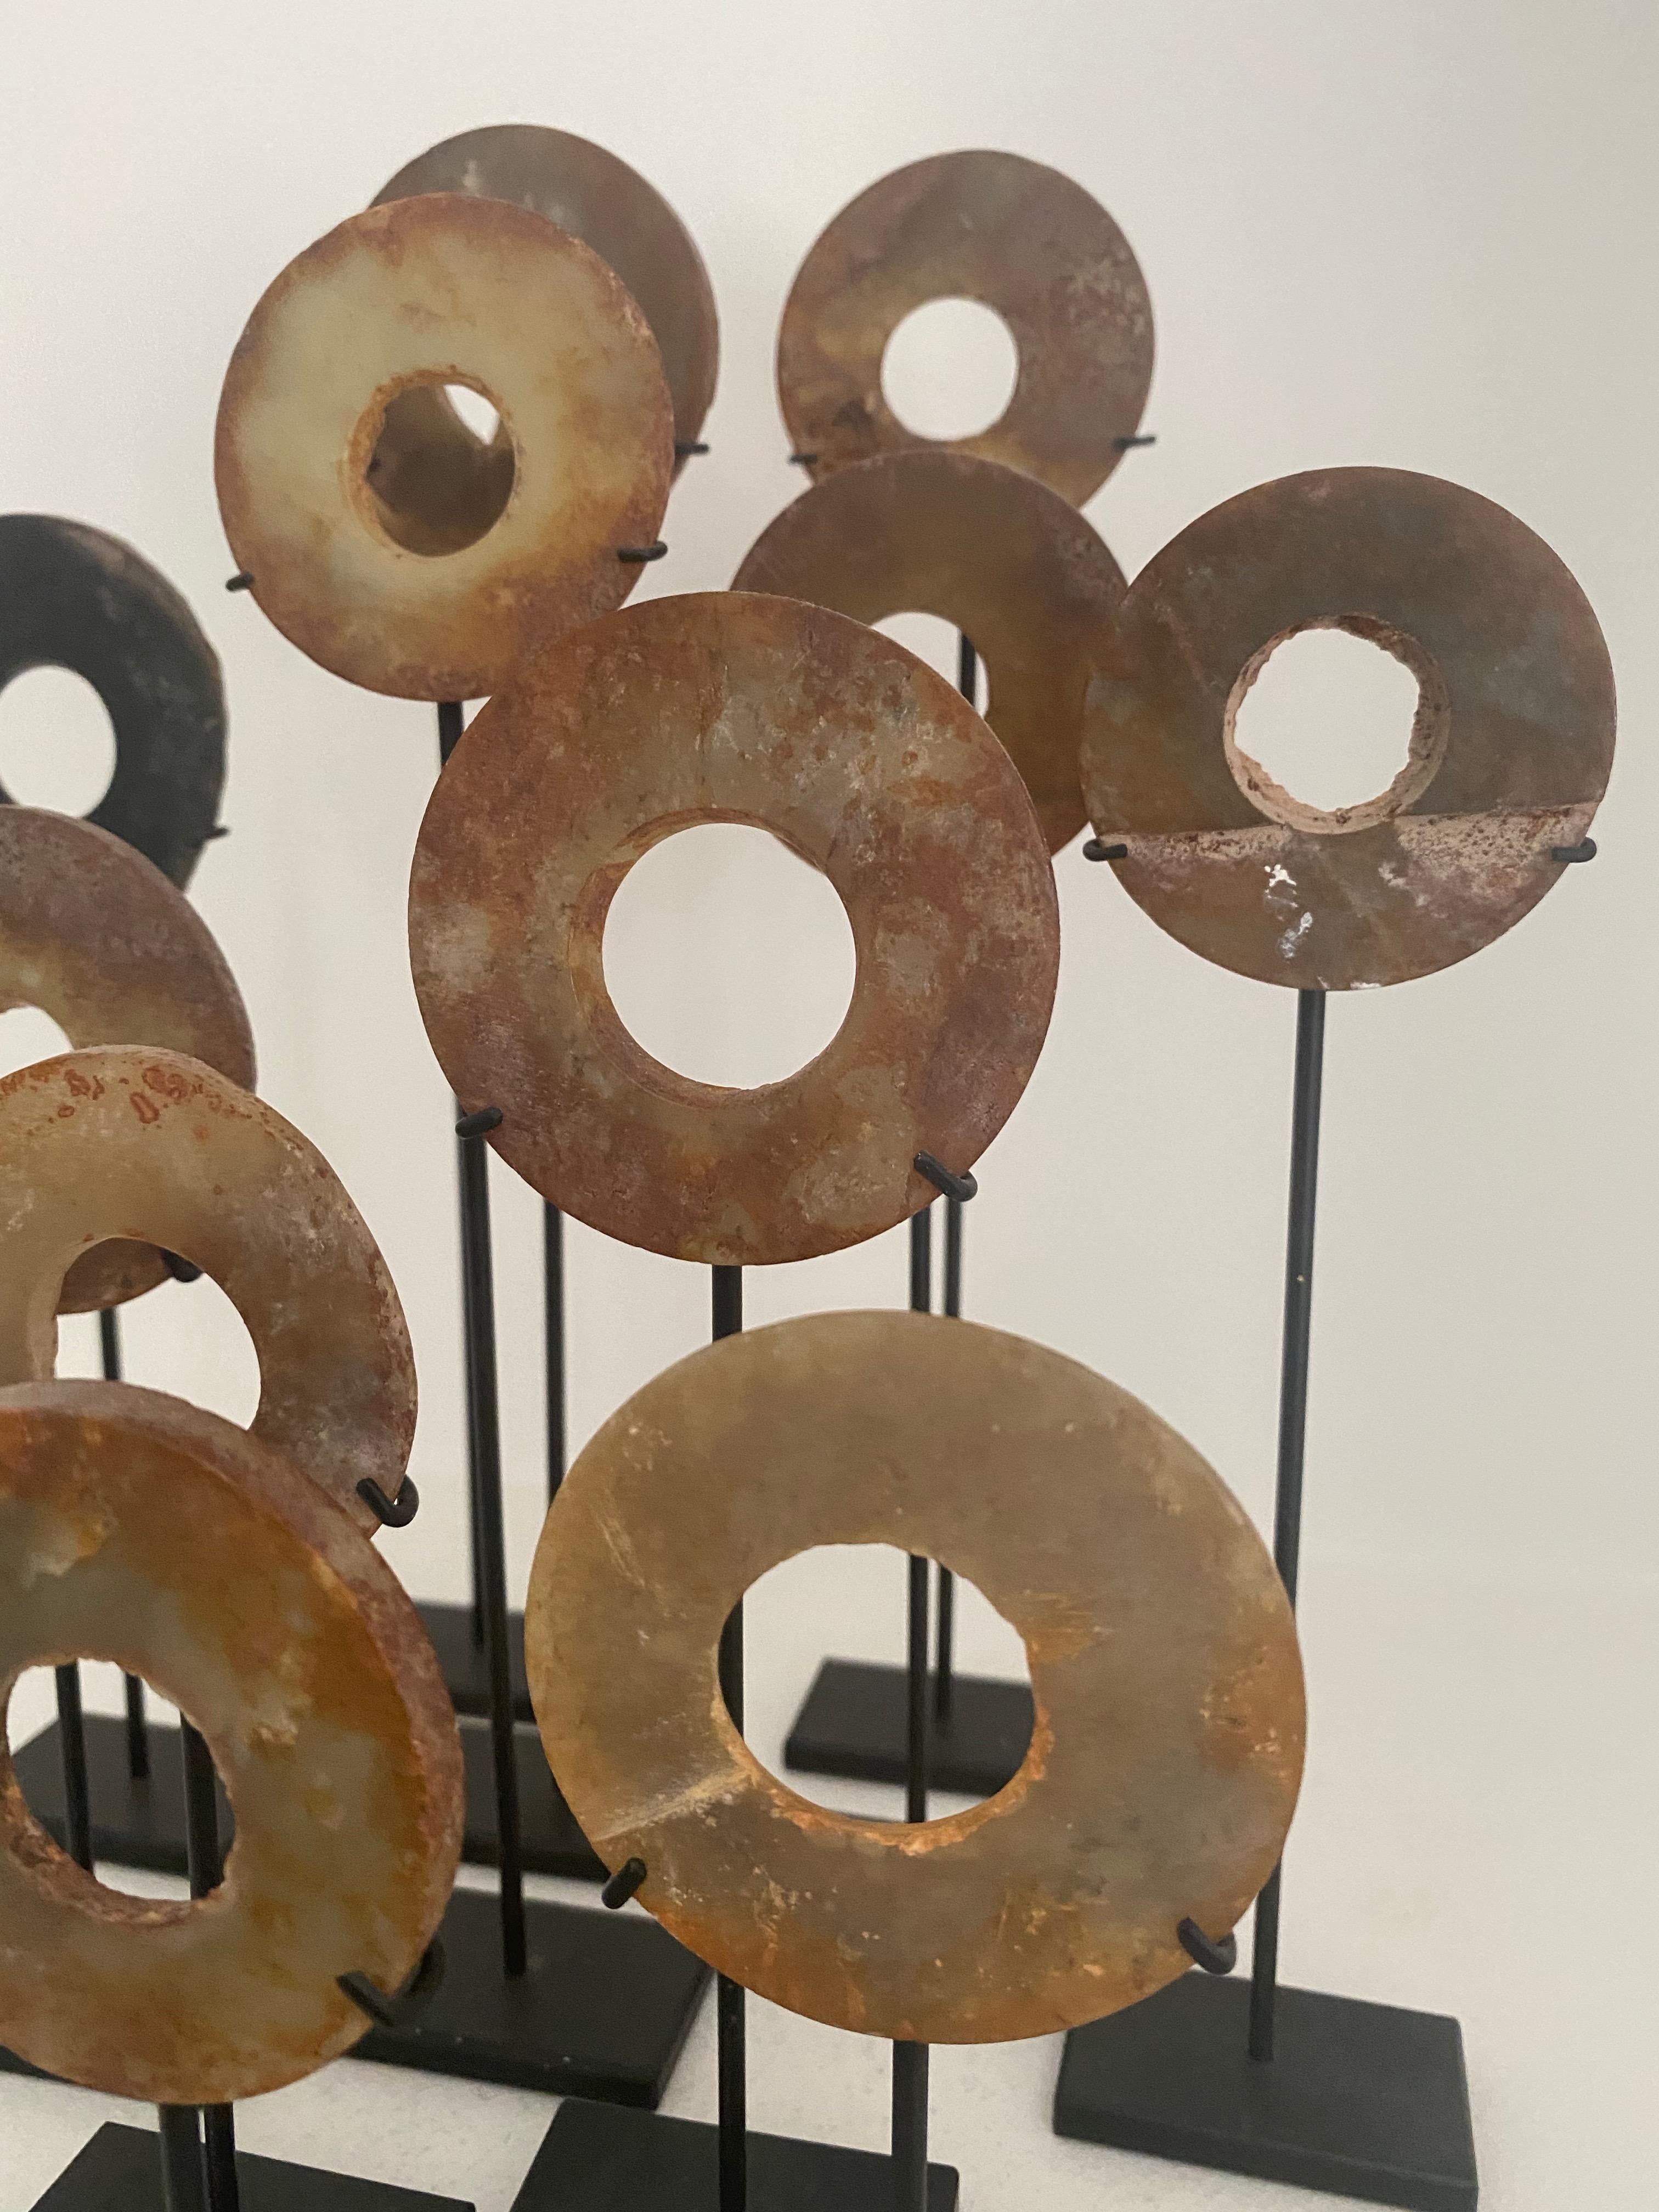 12 marble round objects on a metal stand,
China, 16 th century, used as a ritual and spiritual object,
great old patina,
height of stands between 12 and 15 cm.